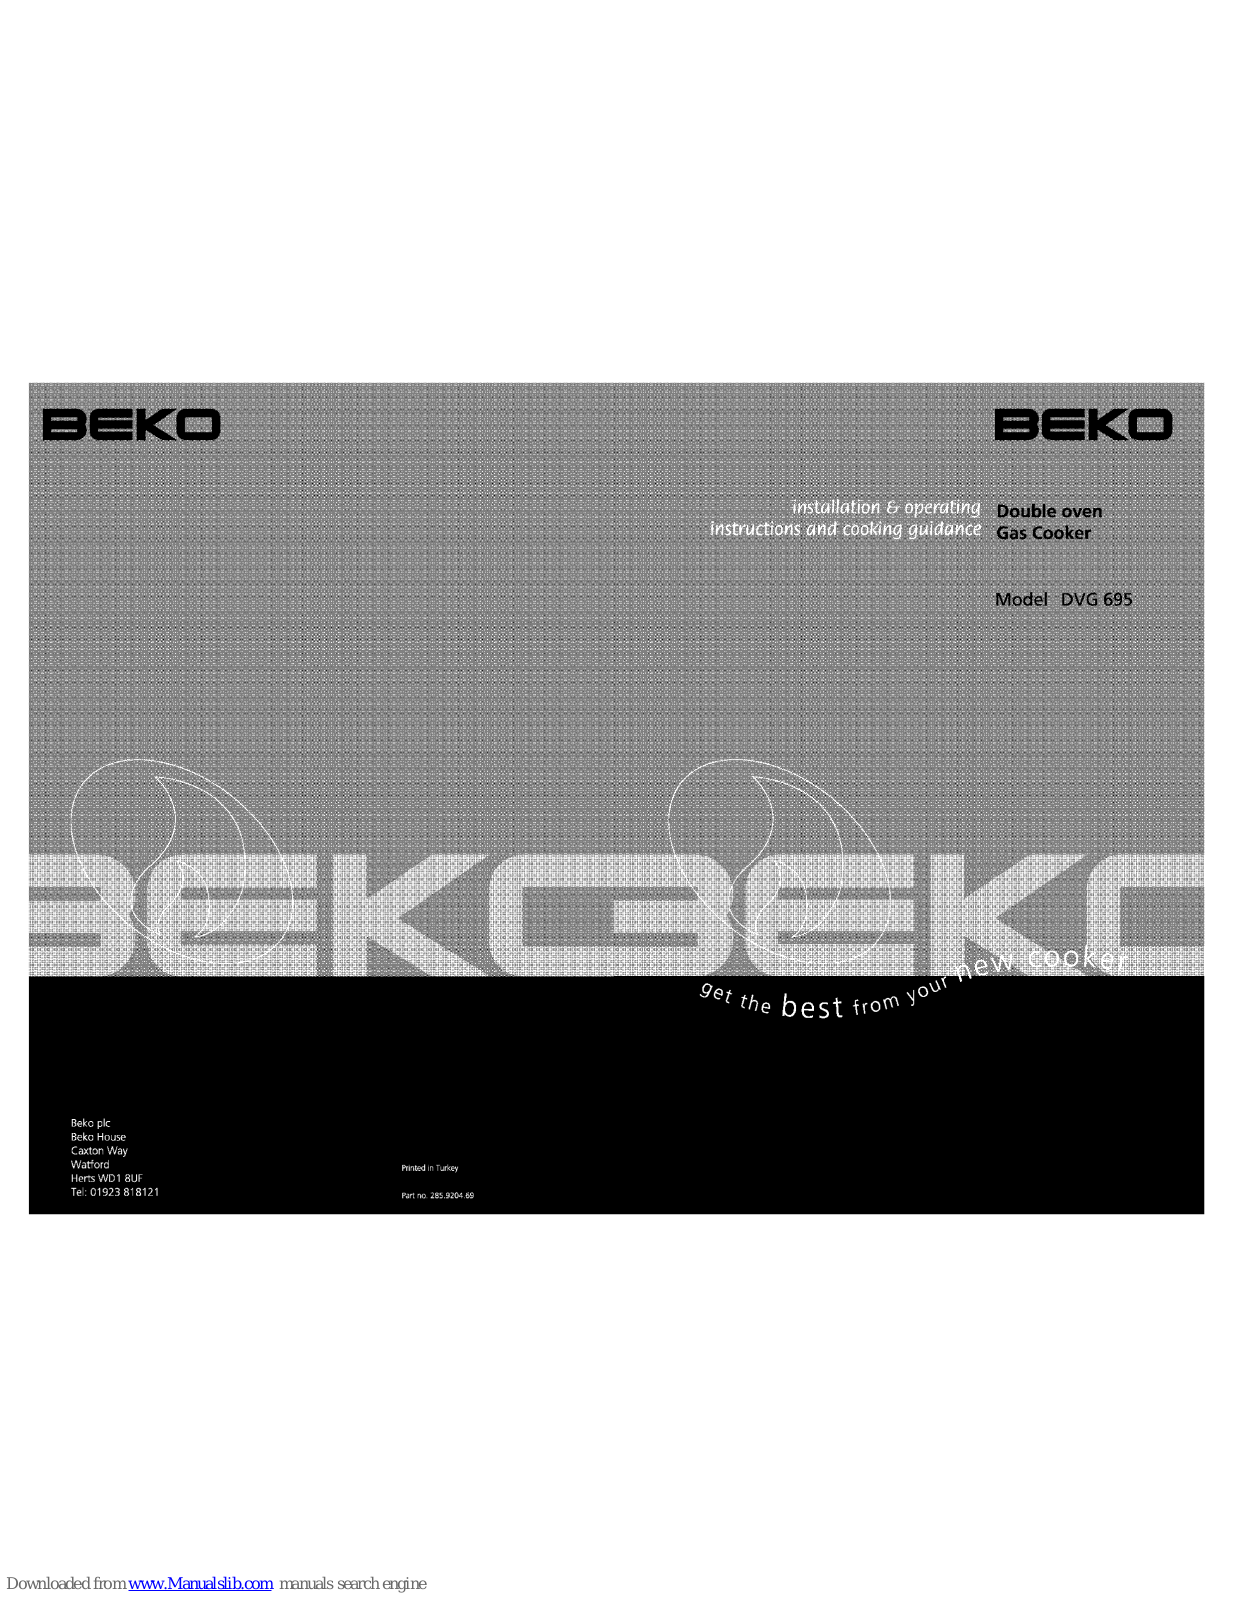 Beko DVG 695, DVG692 Installation & Operating Instructions And Cooking Guidance